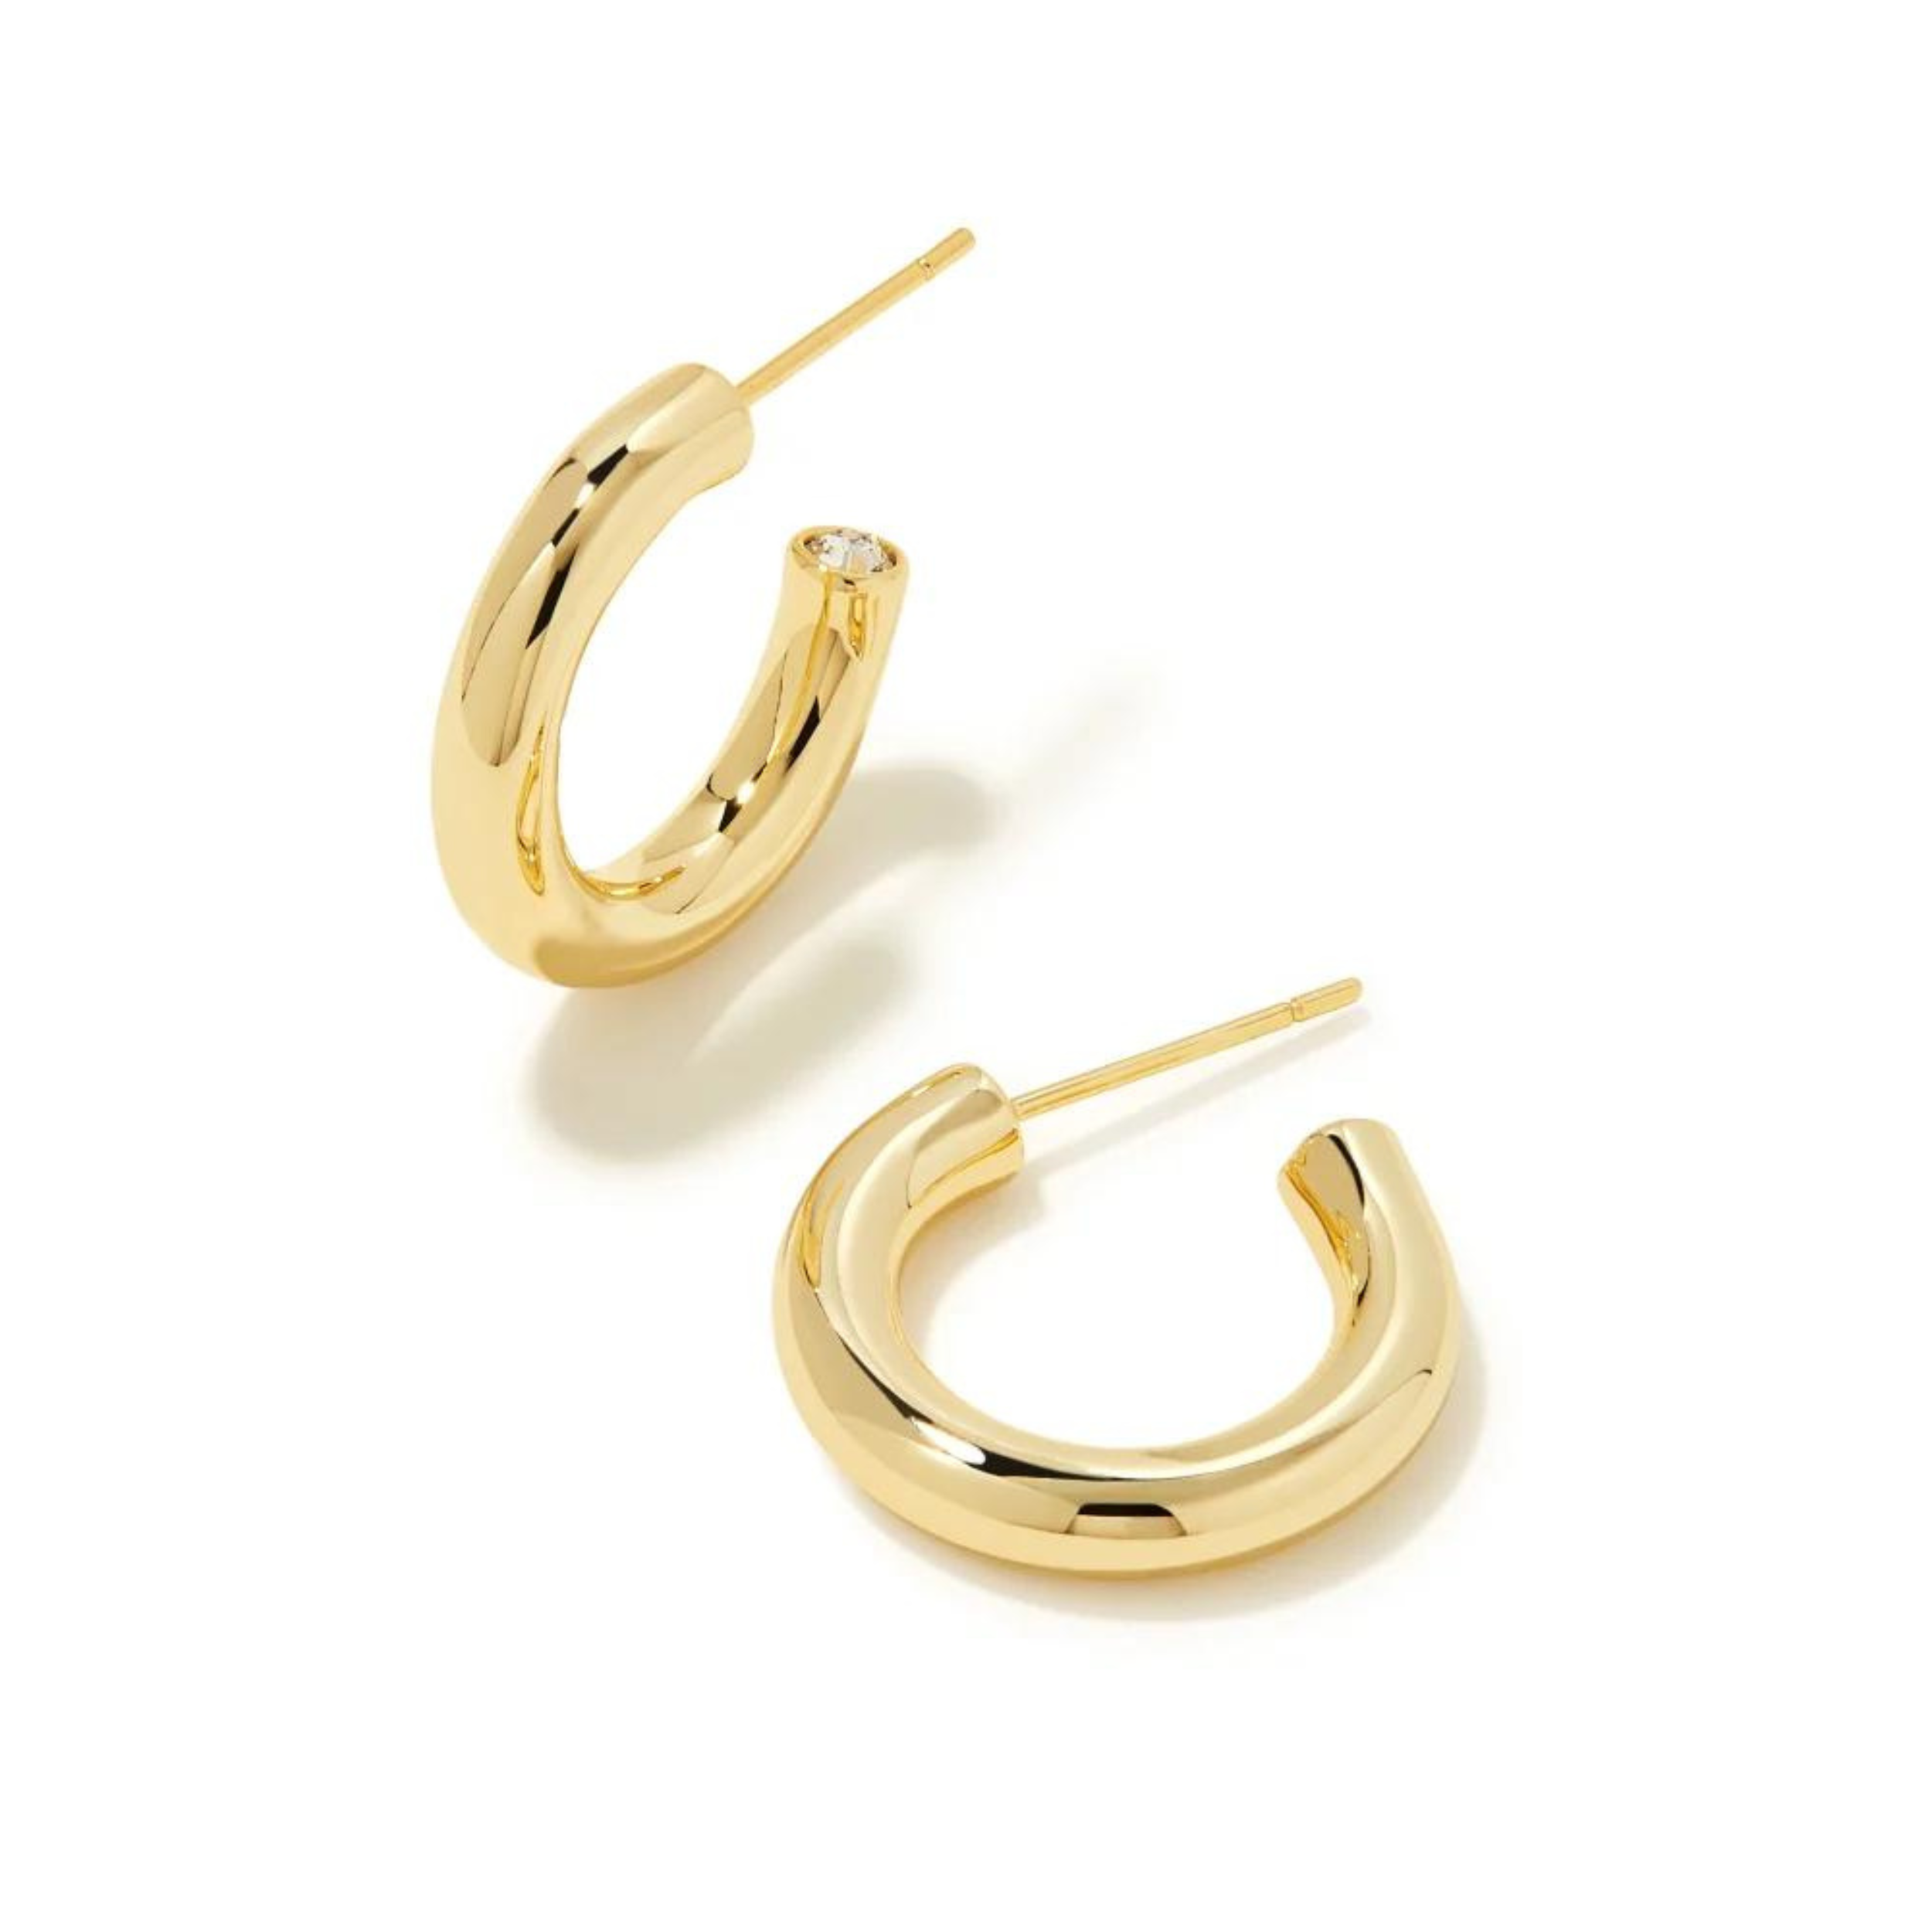 Pictured is a pair of gold hoop earrings on a white background.